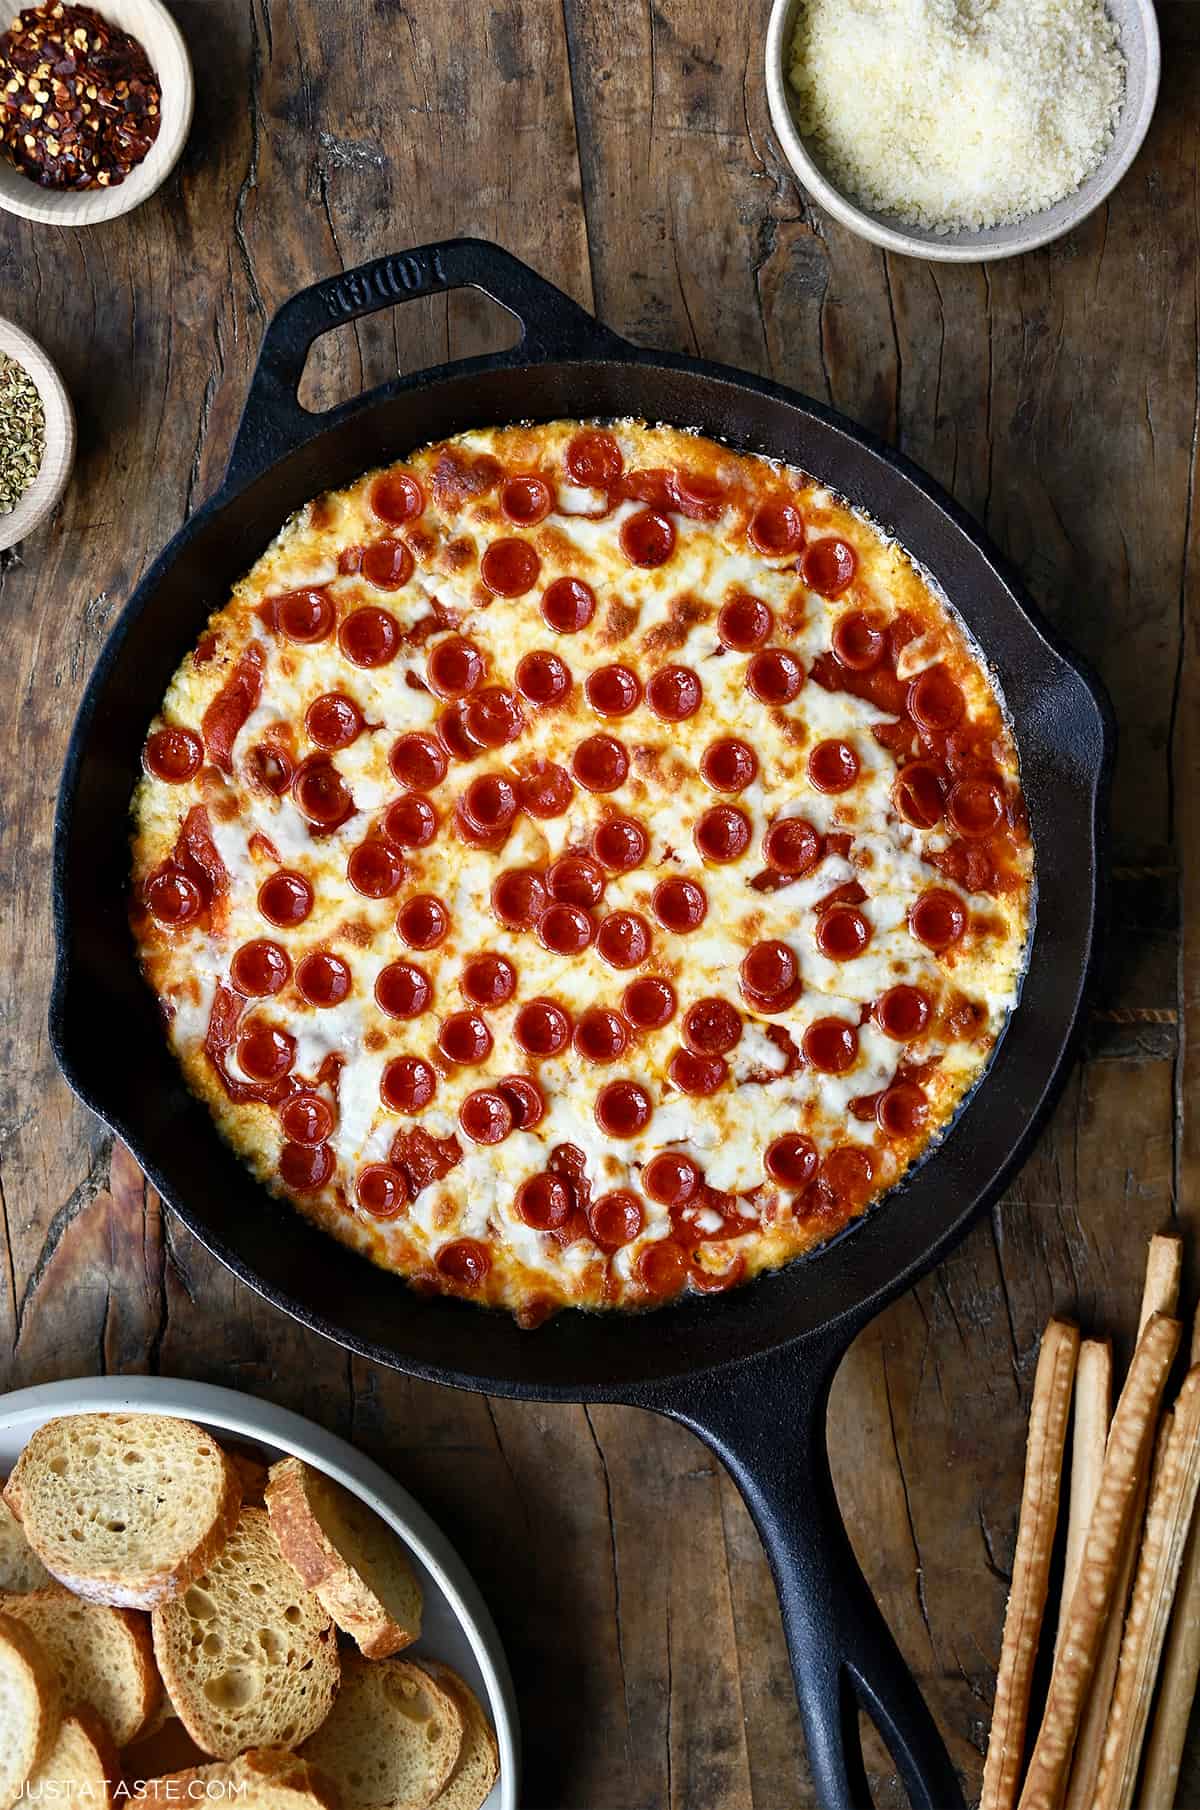 Pepperoni pizza dip in a cast iron skillet next to a small bowl containing crispy baguette toasts.